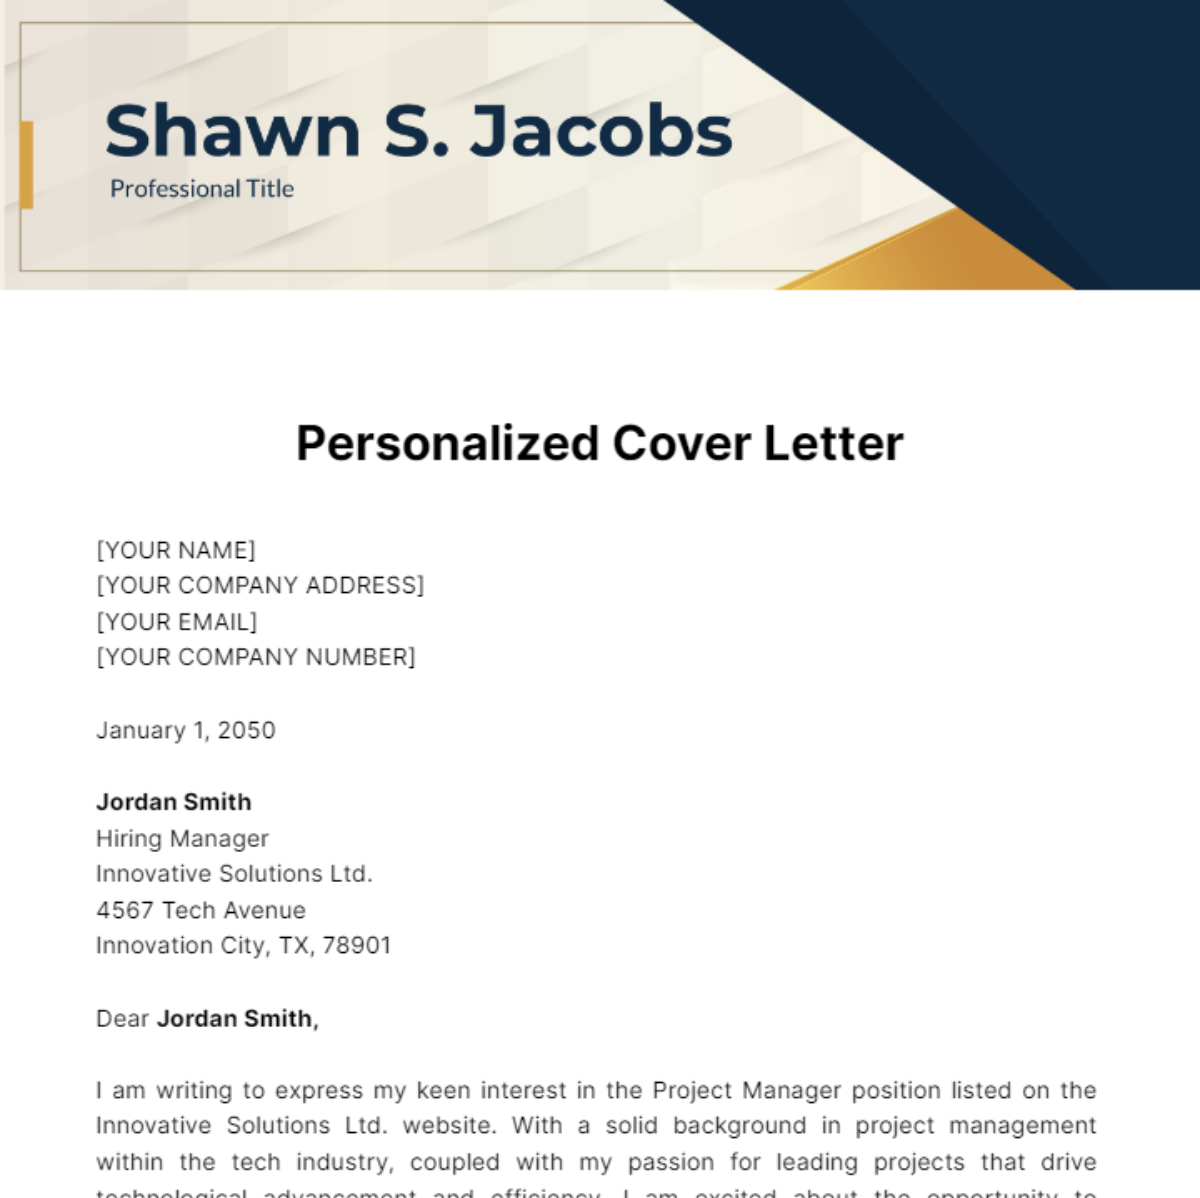 Personalized Cover Letter Template